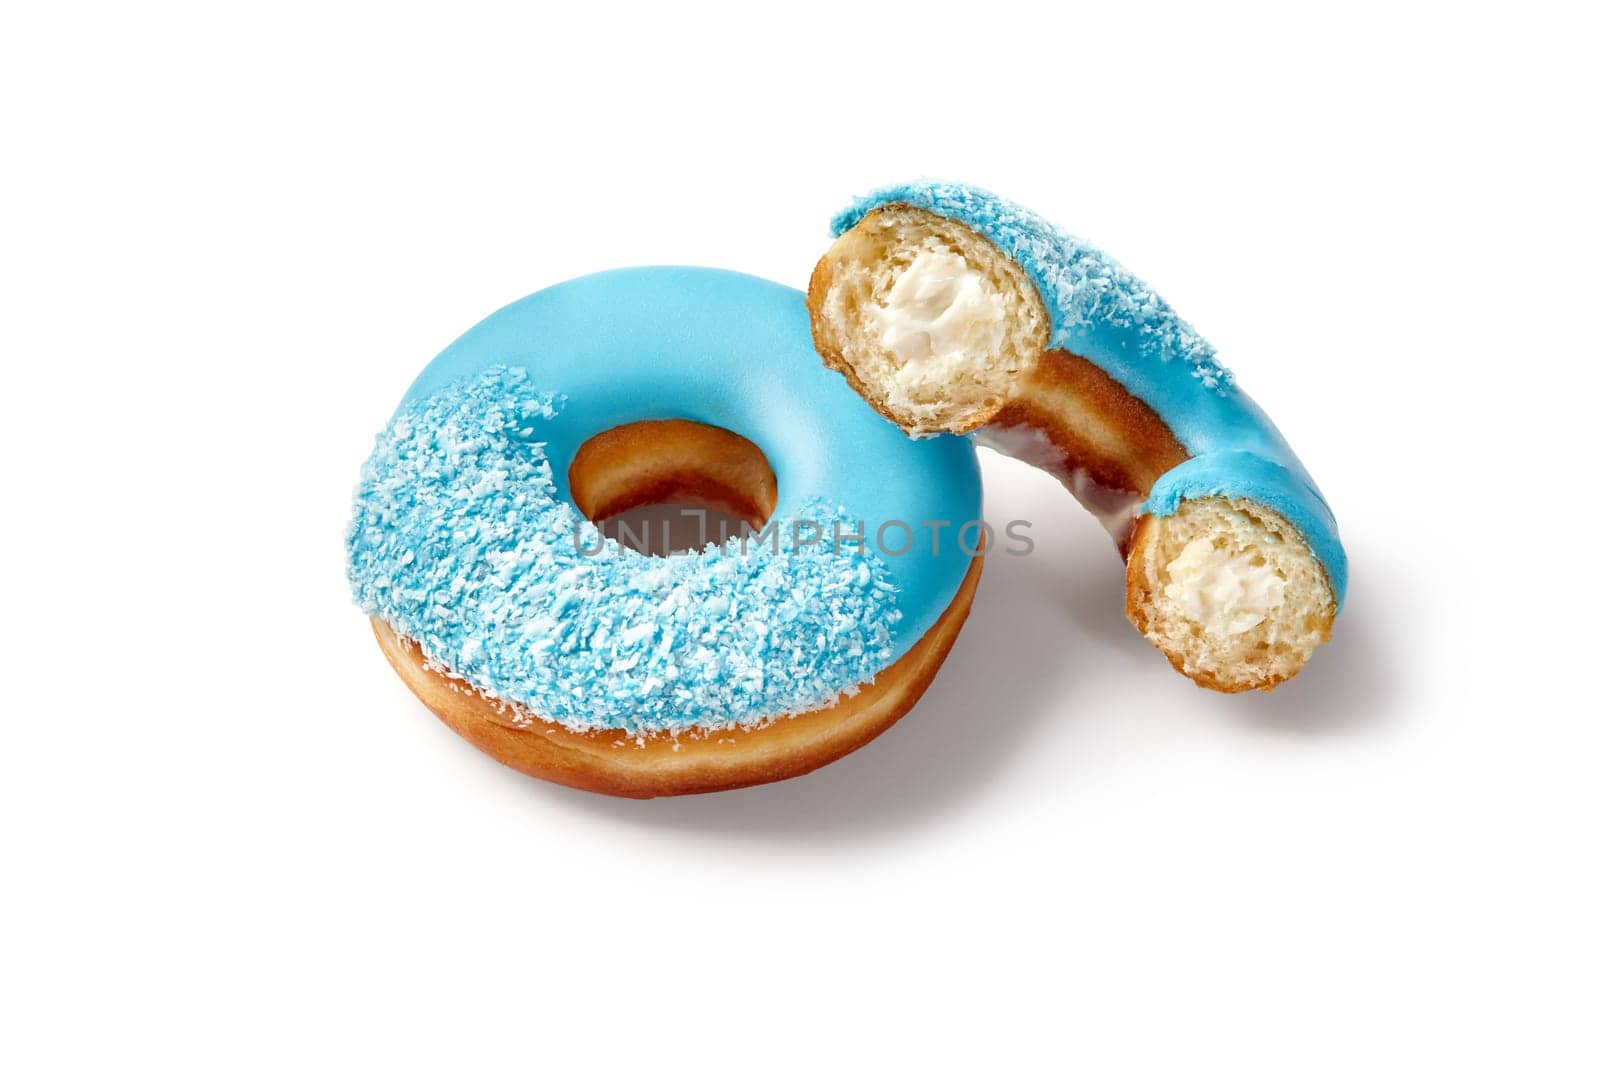 Donuts with creamy filling, blue frosting and coconut flakes by nazarovsergey